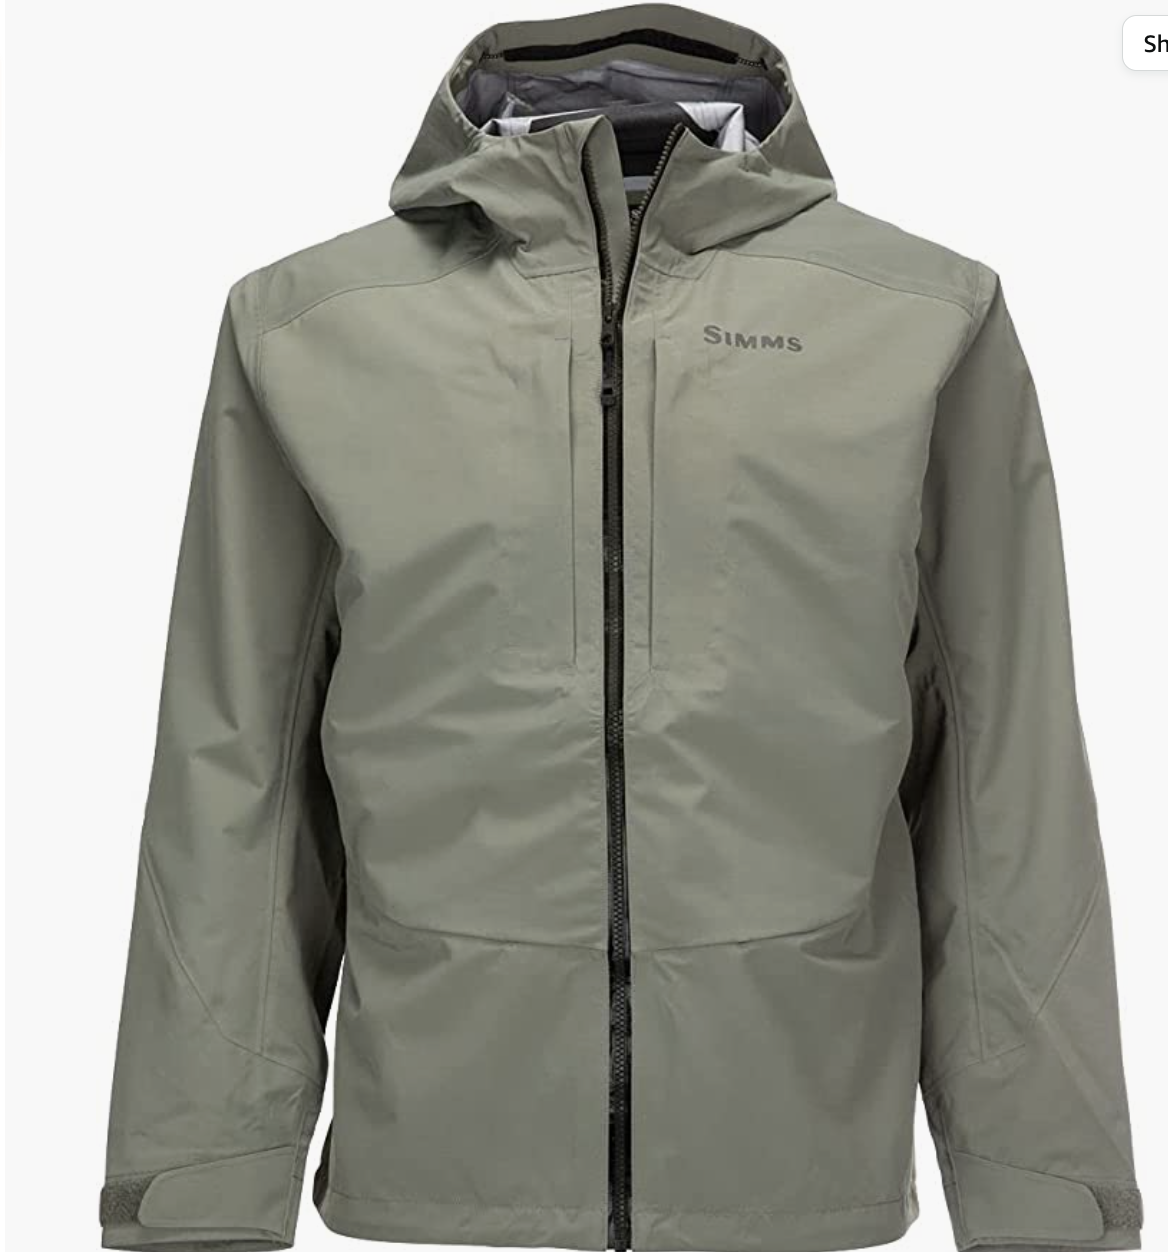 Simms Fishing and Outdoor Jacket